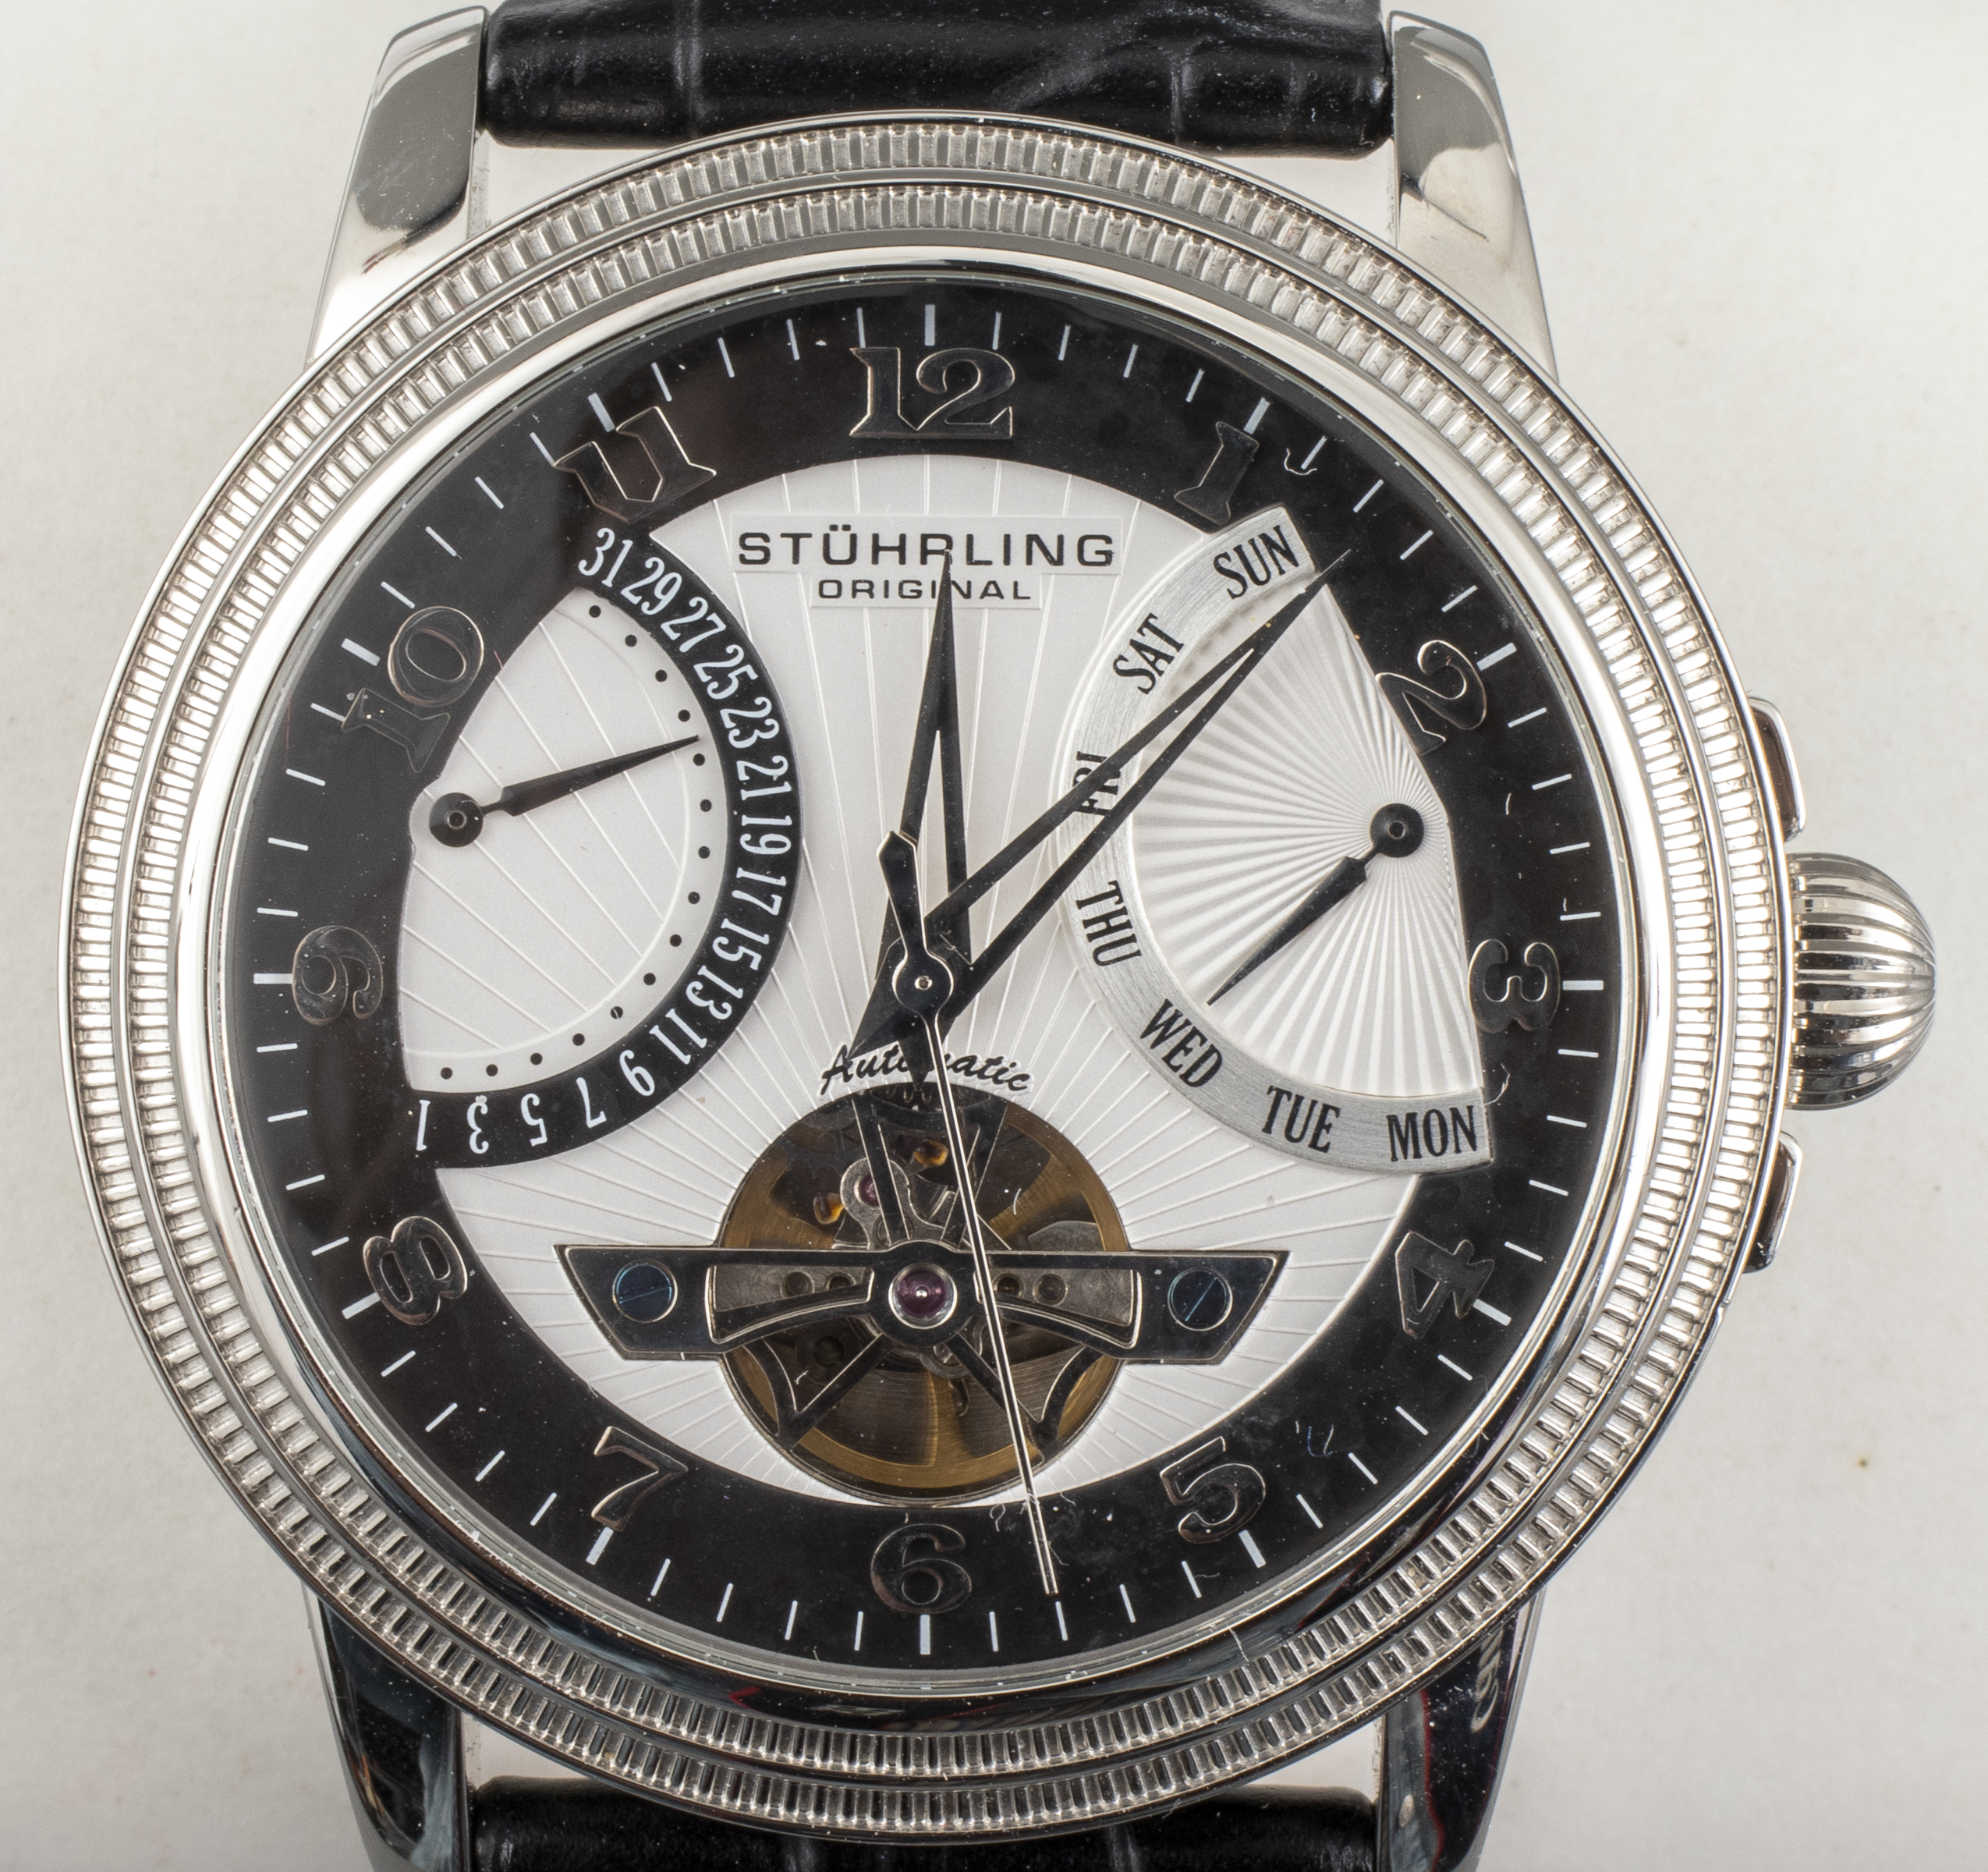 STUHRLING STAINLESS STEEL AUTOMATIC